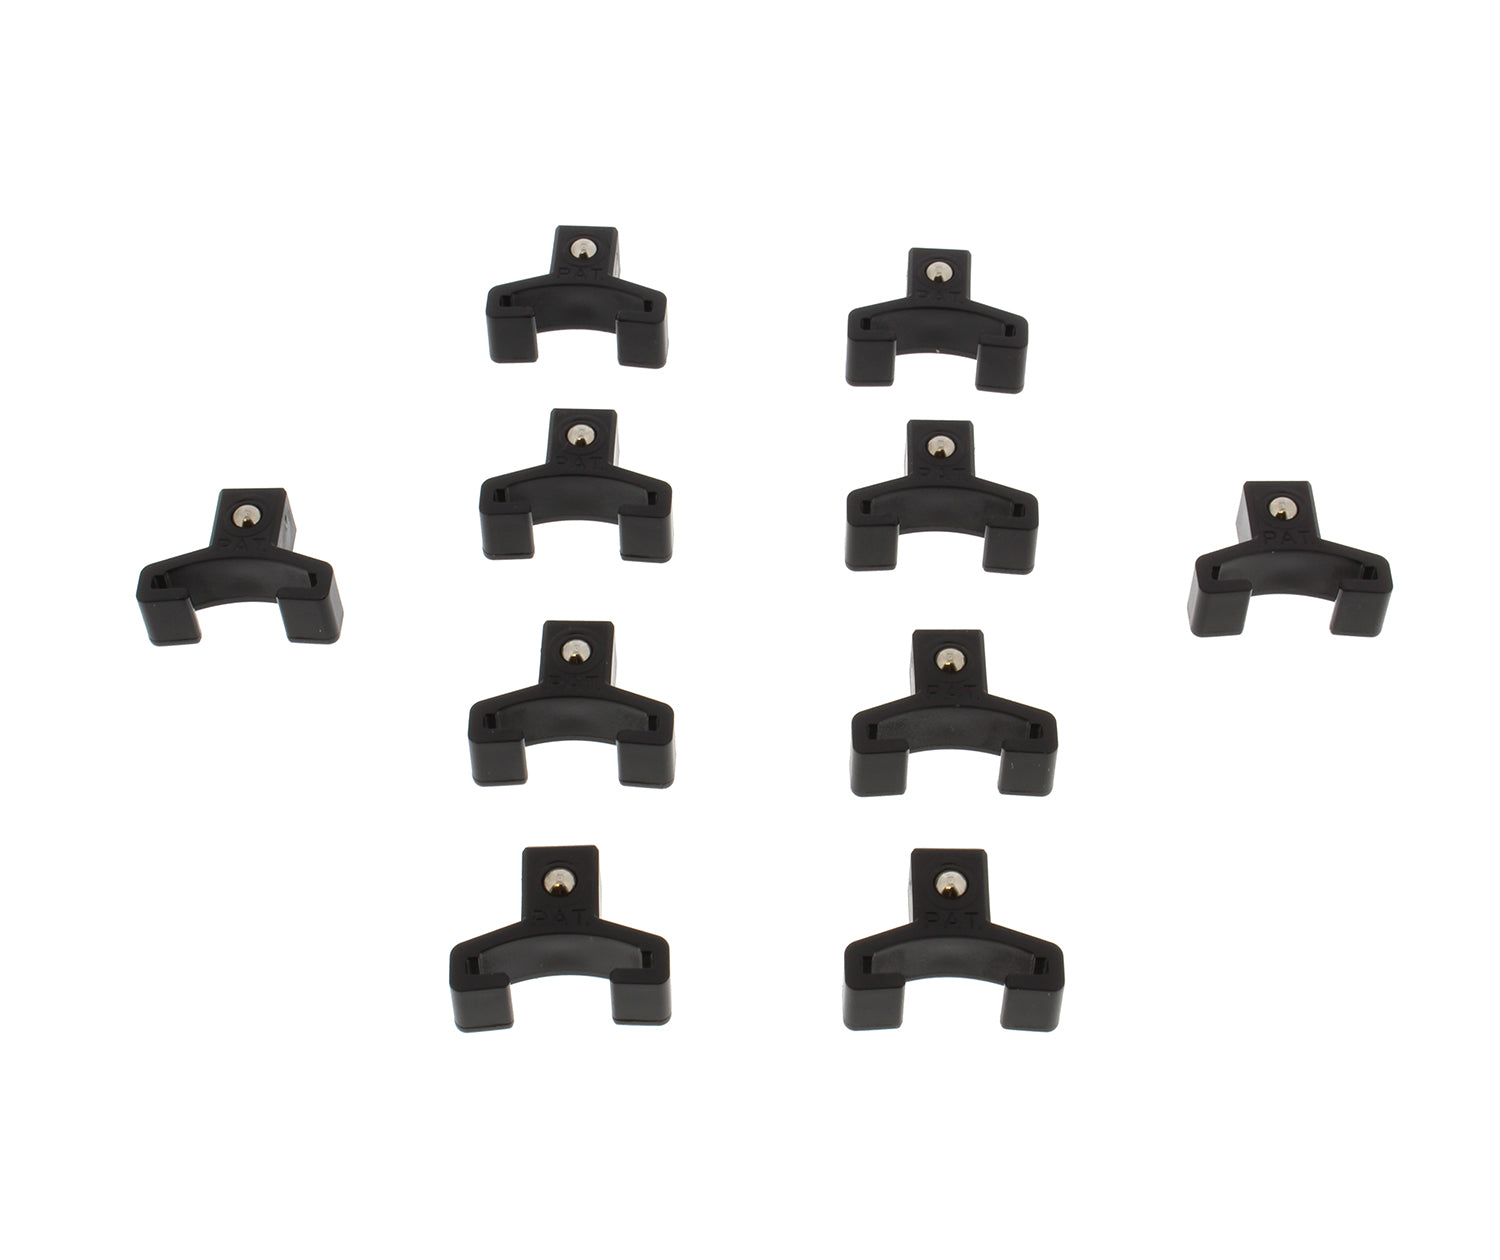 3/8" Inch Drive Replacement Socket Clip 10-Pack for Aluminum Rail